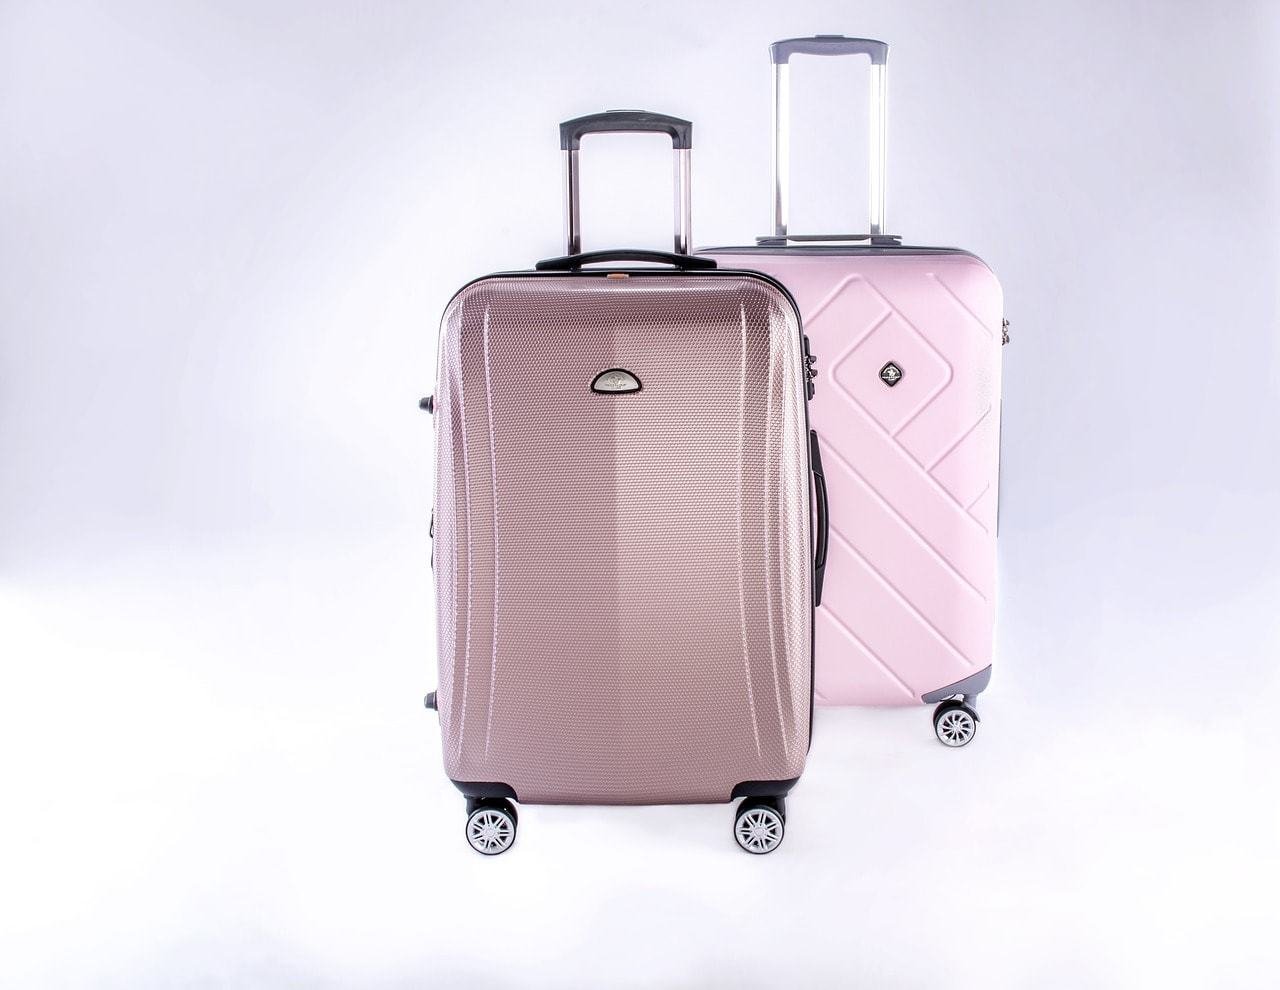 5 Piece Luxury Luggage Set with Combination Lock for Sale in